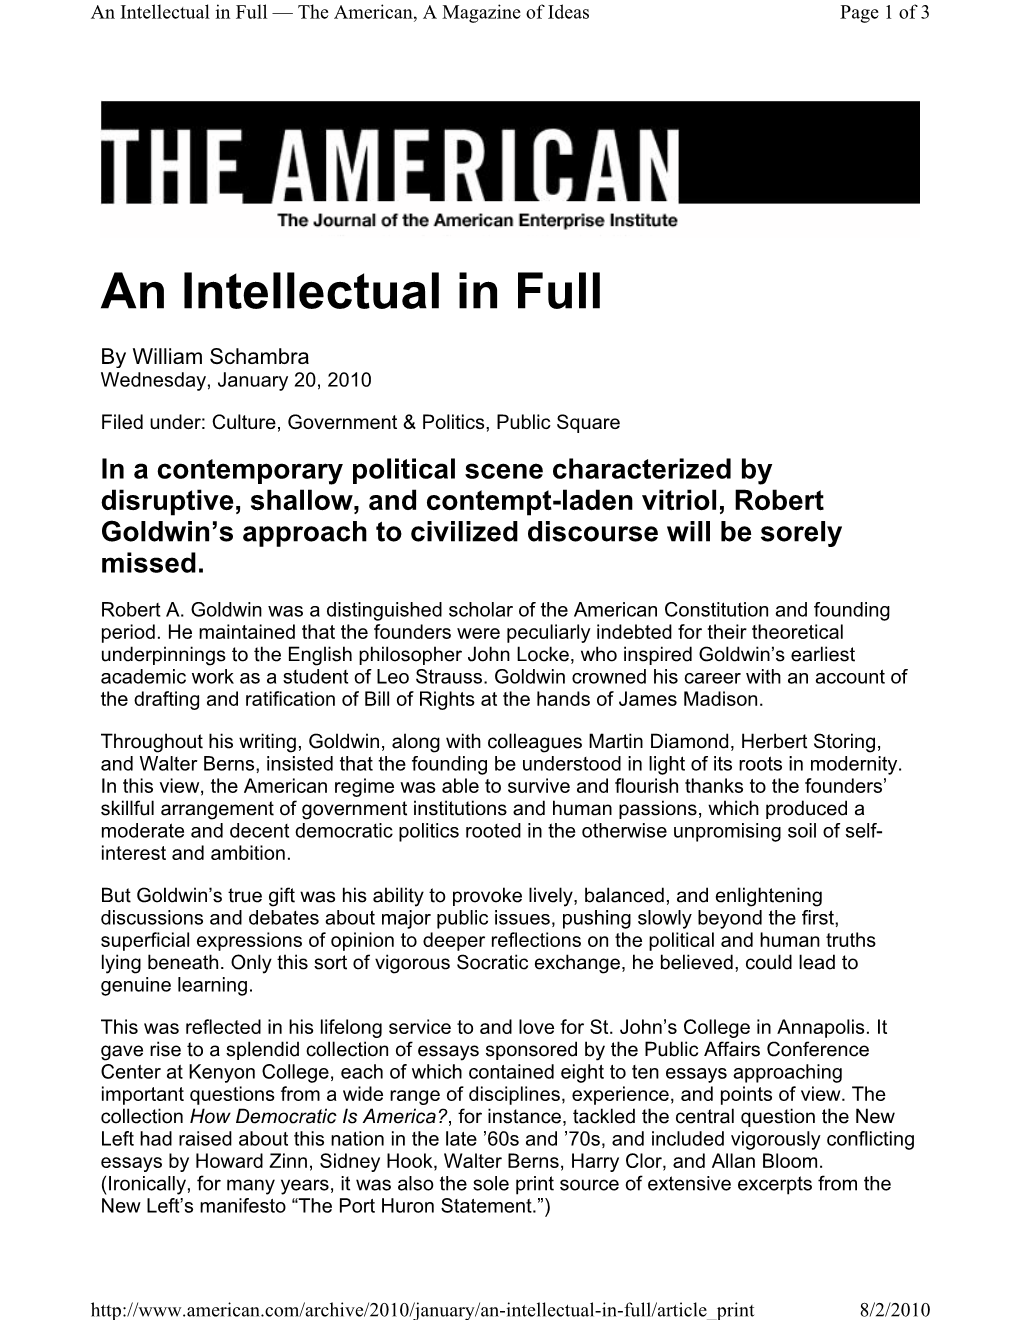 An Intellectual in Full — the American, a Magazine of Ideas Page 1 of 3